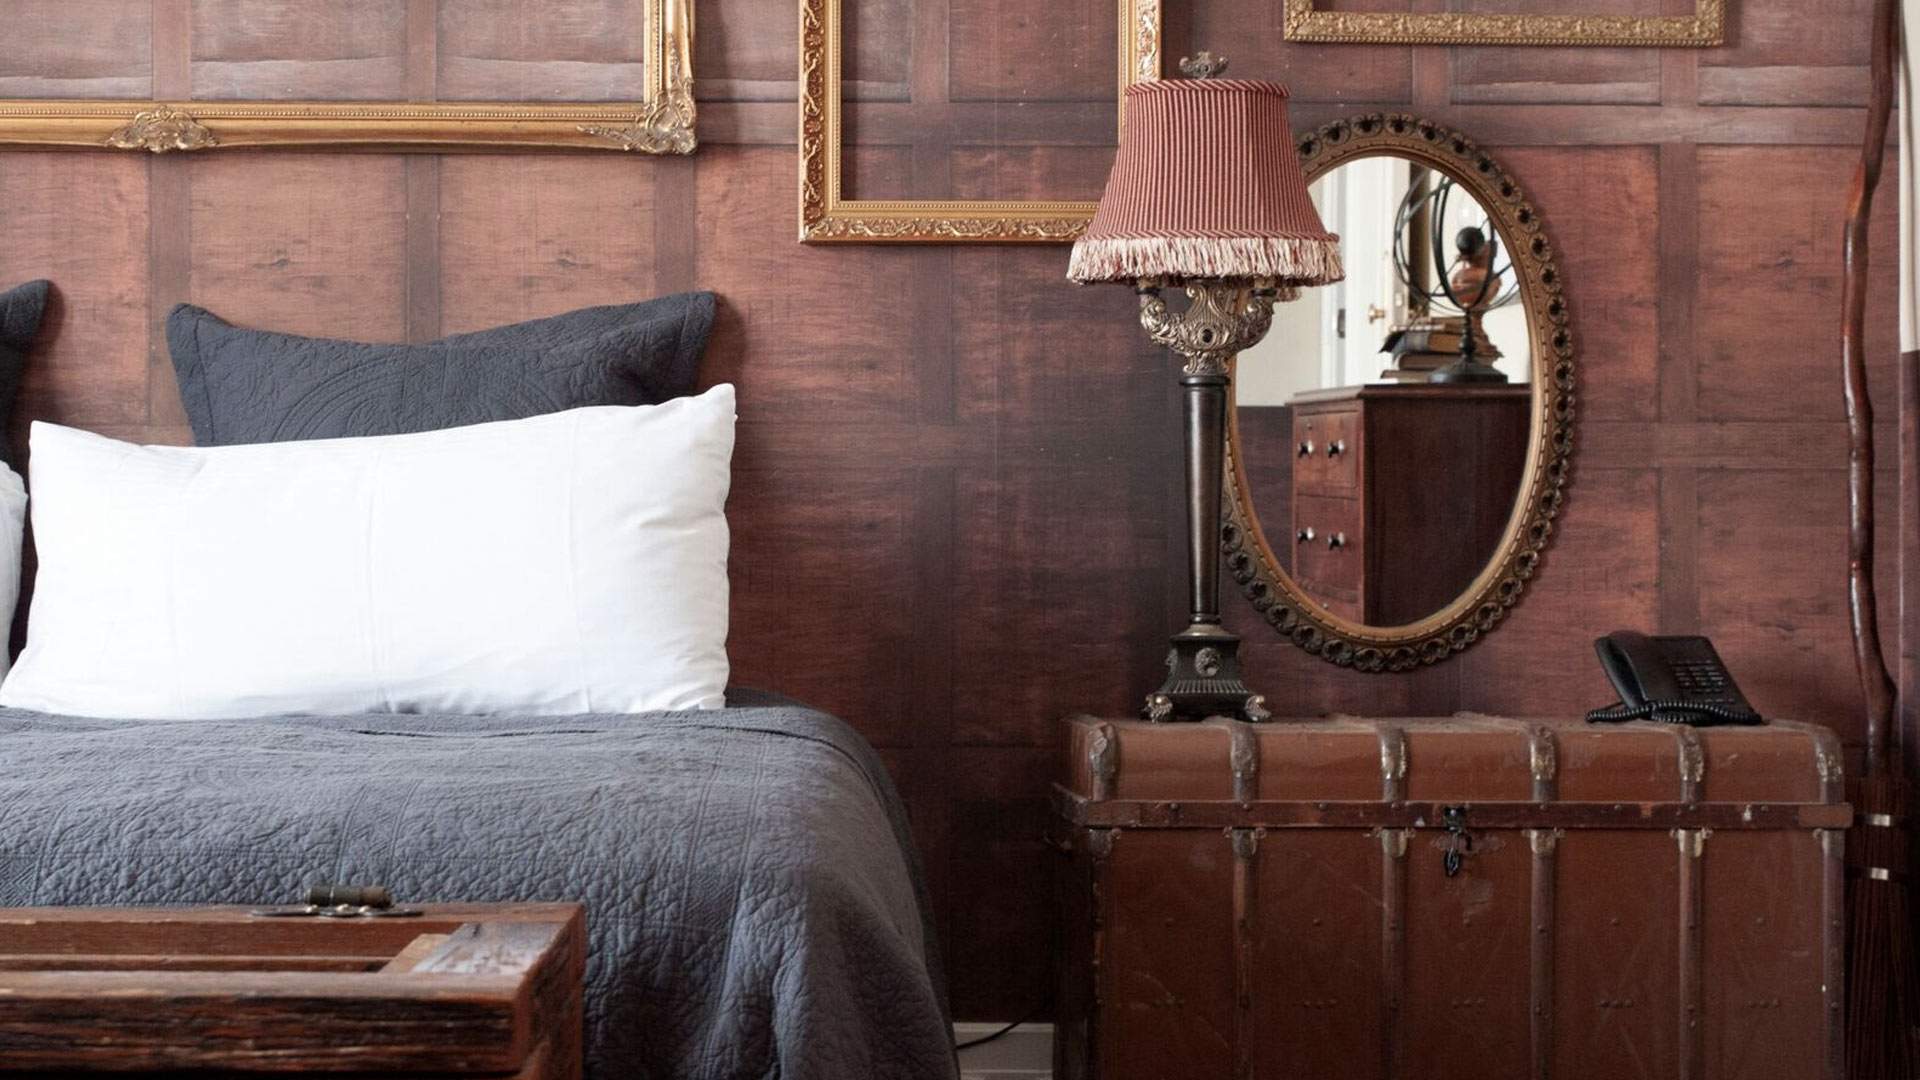 Mere Muggles Can Now Spend the Night at Hogwarts Thanks to This New Wizards Suite